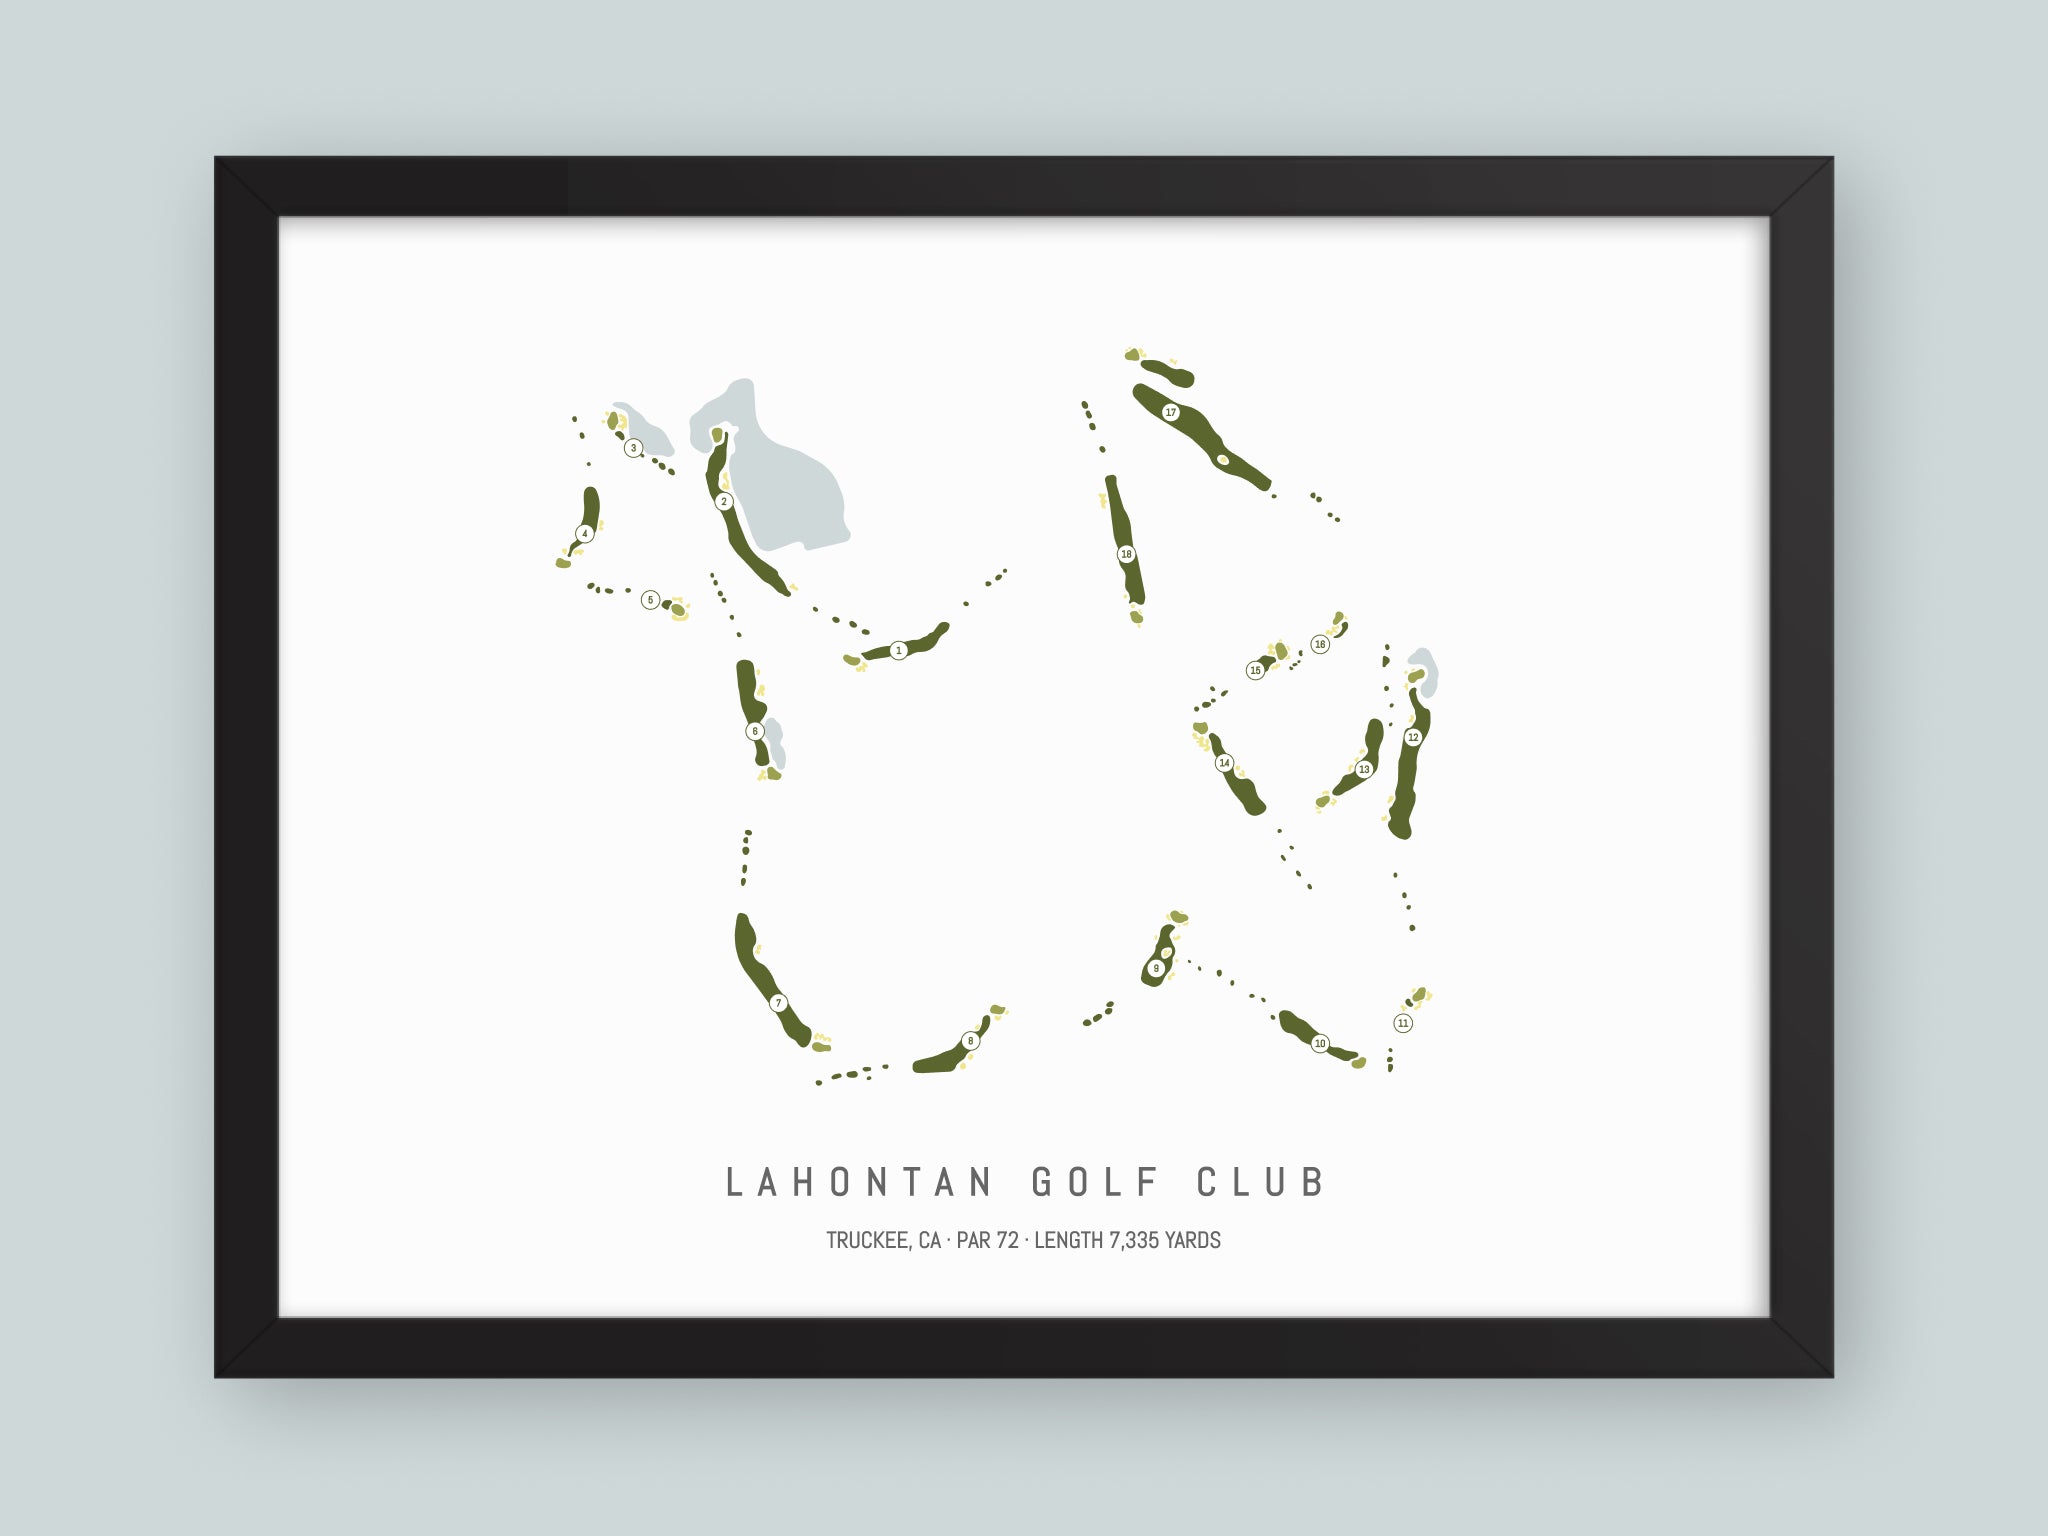 Lahontan-Golf-Club-CA--Black-Frame-24x18-With-Hole-Numbers